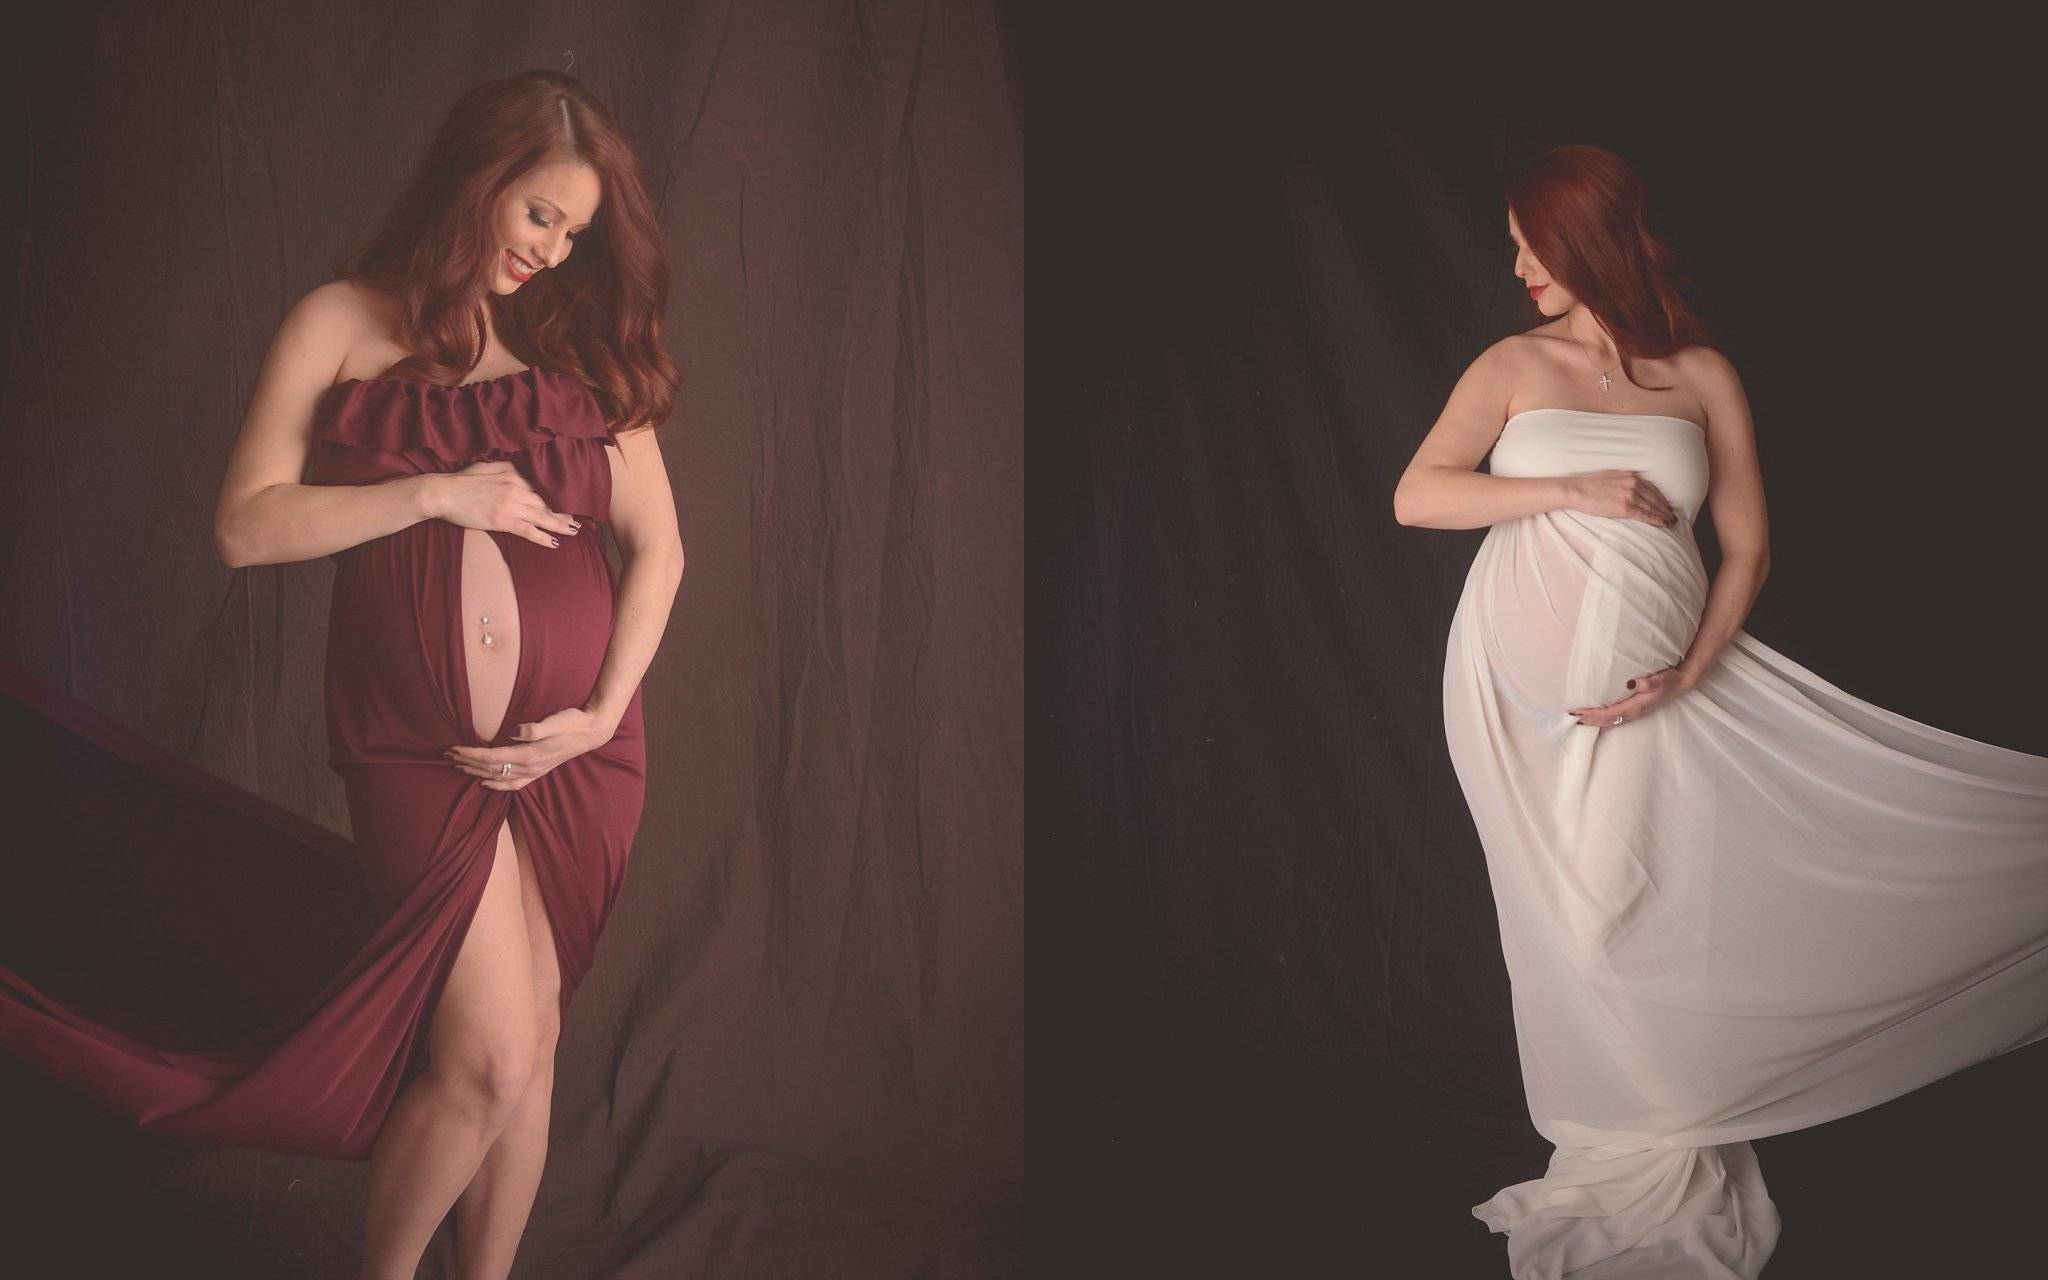 Two pictures of a pregnant woman posing in a dress.